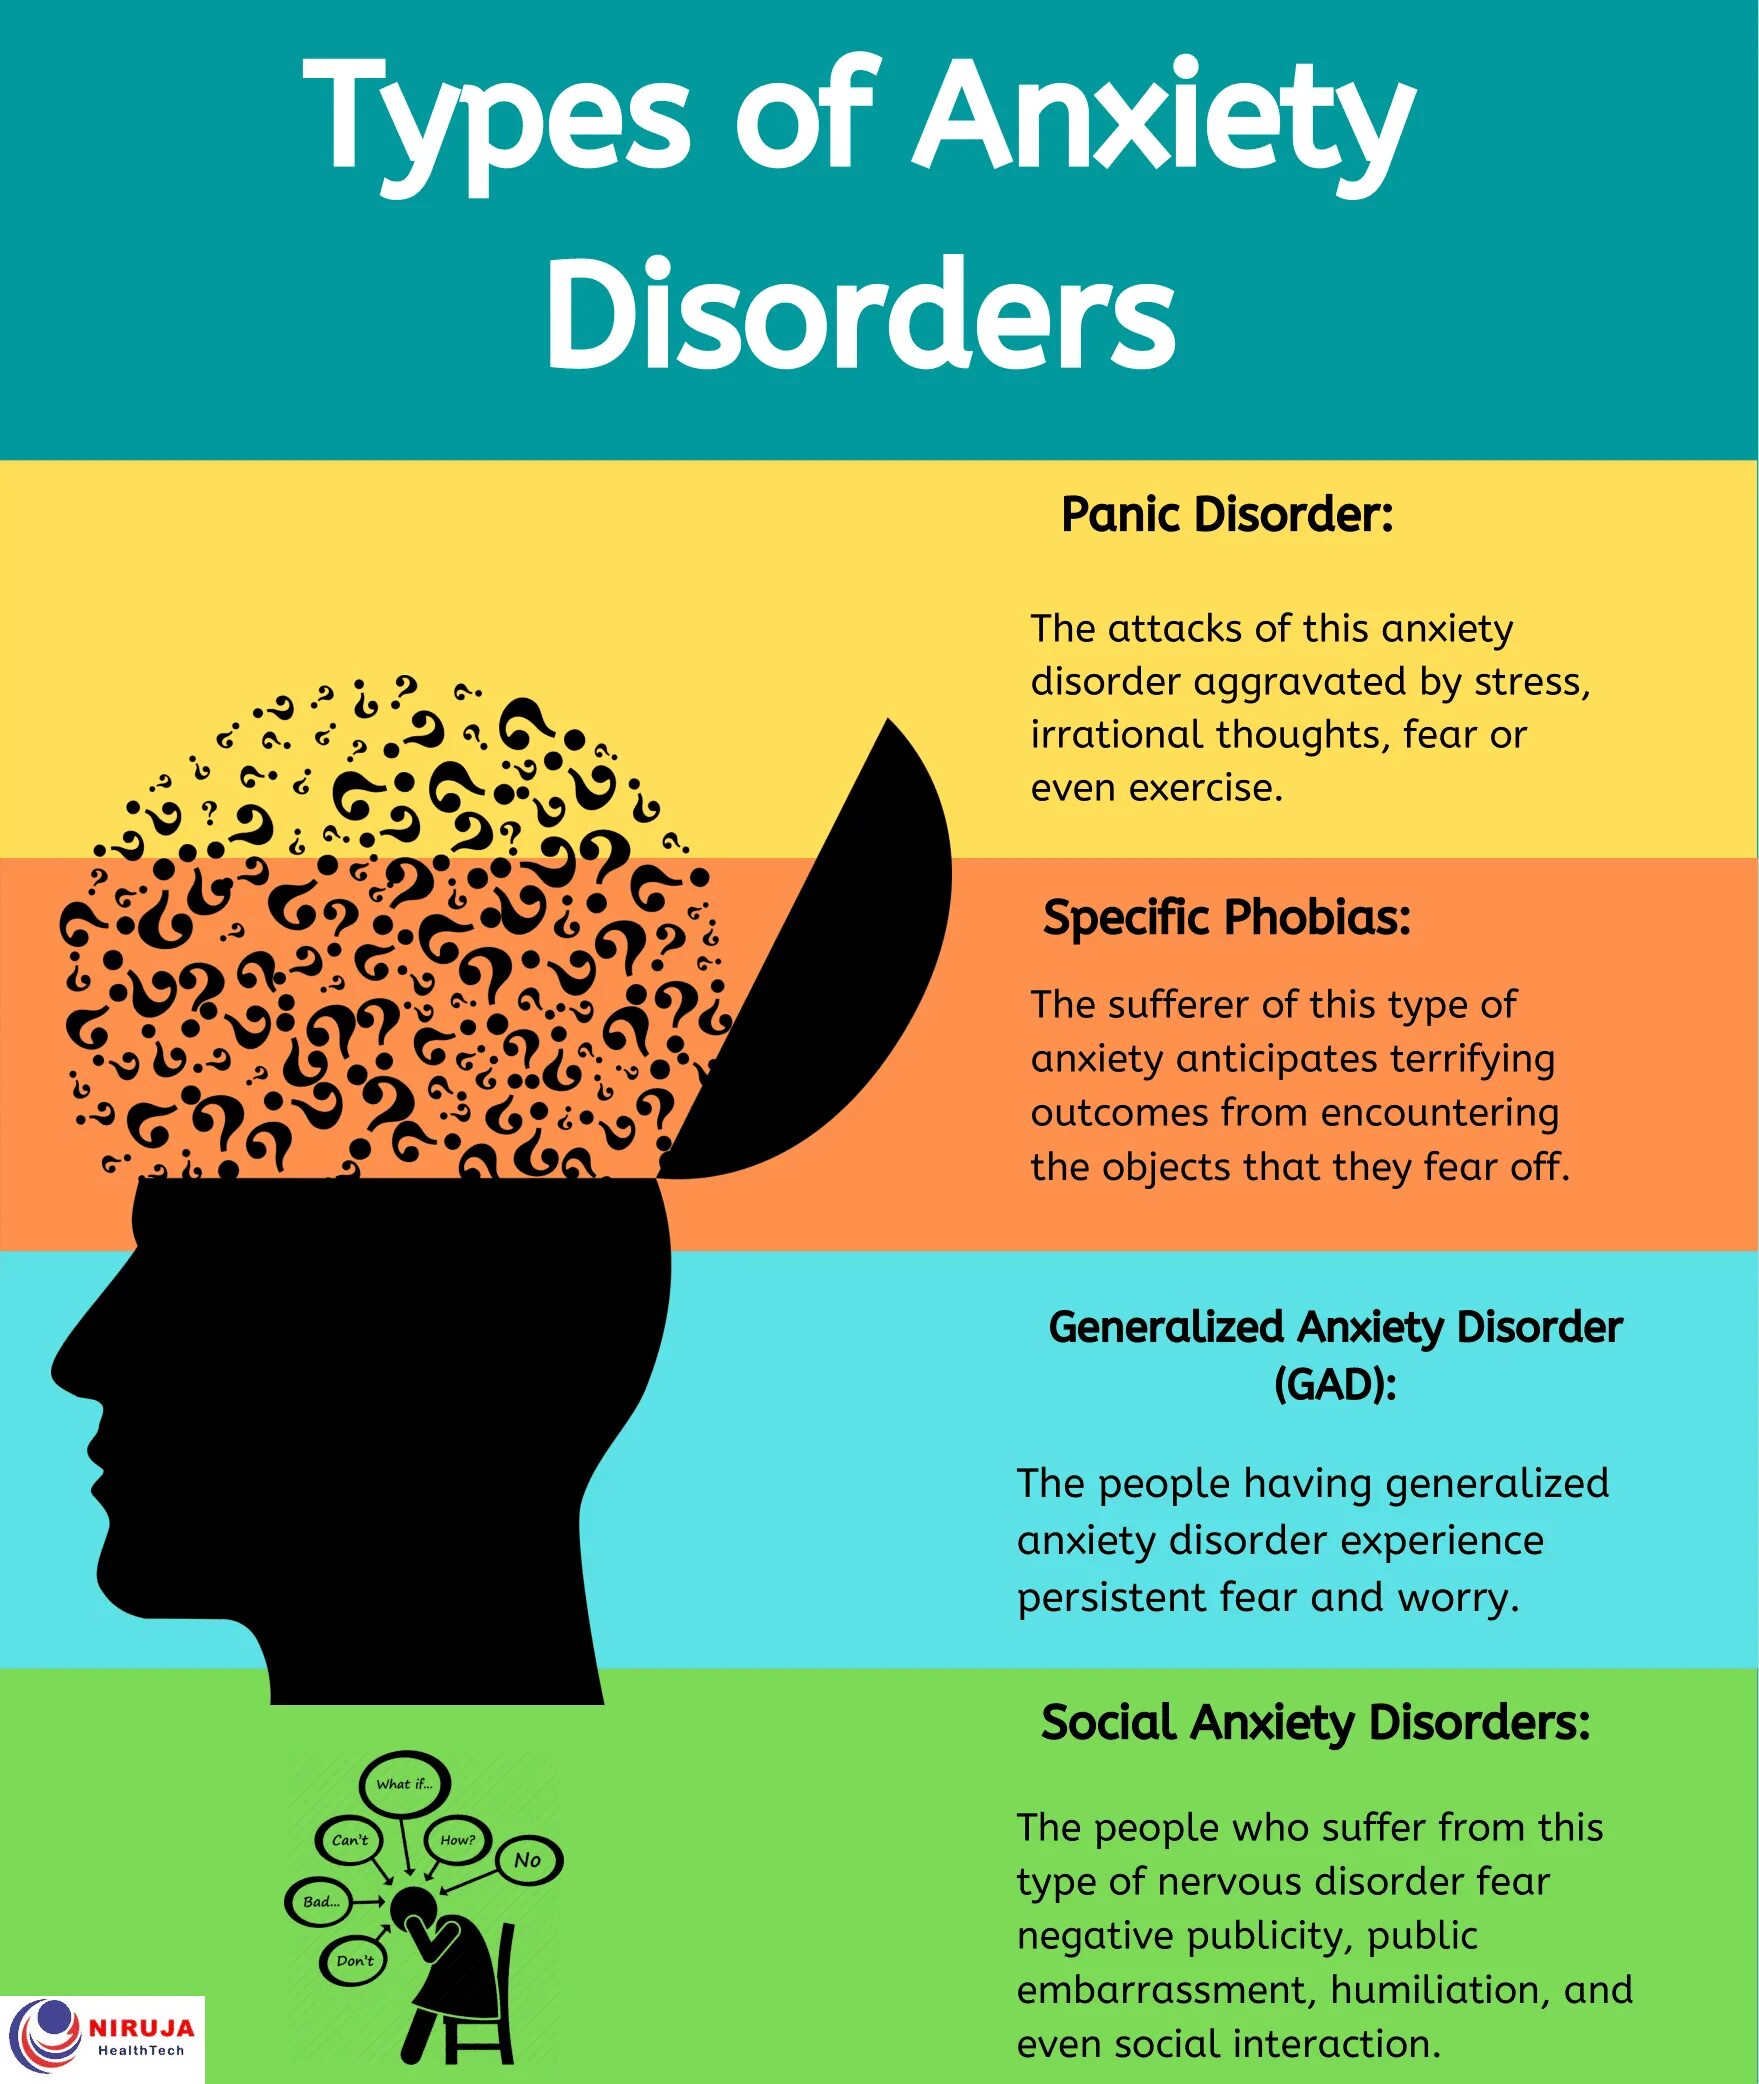 Types of Anxiety. Anxiety Disorders. Types of Disorders. Types of Mental Disorders.